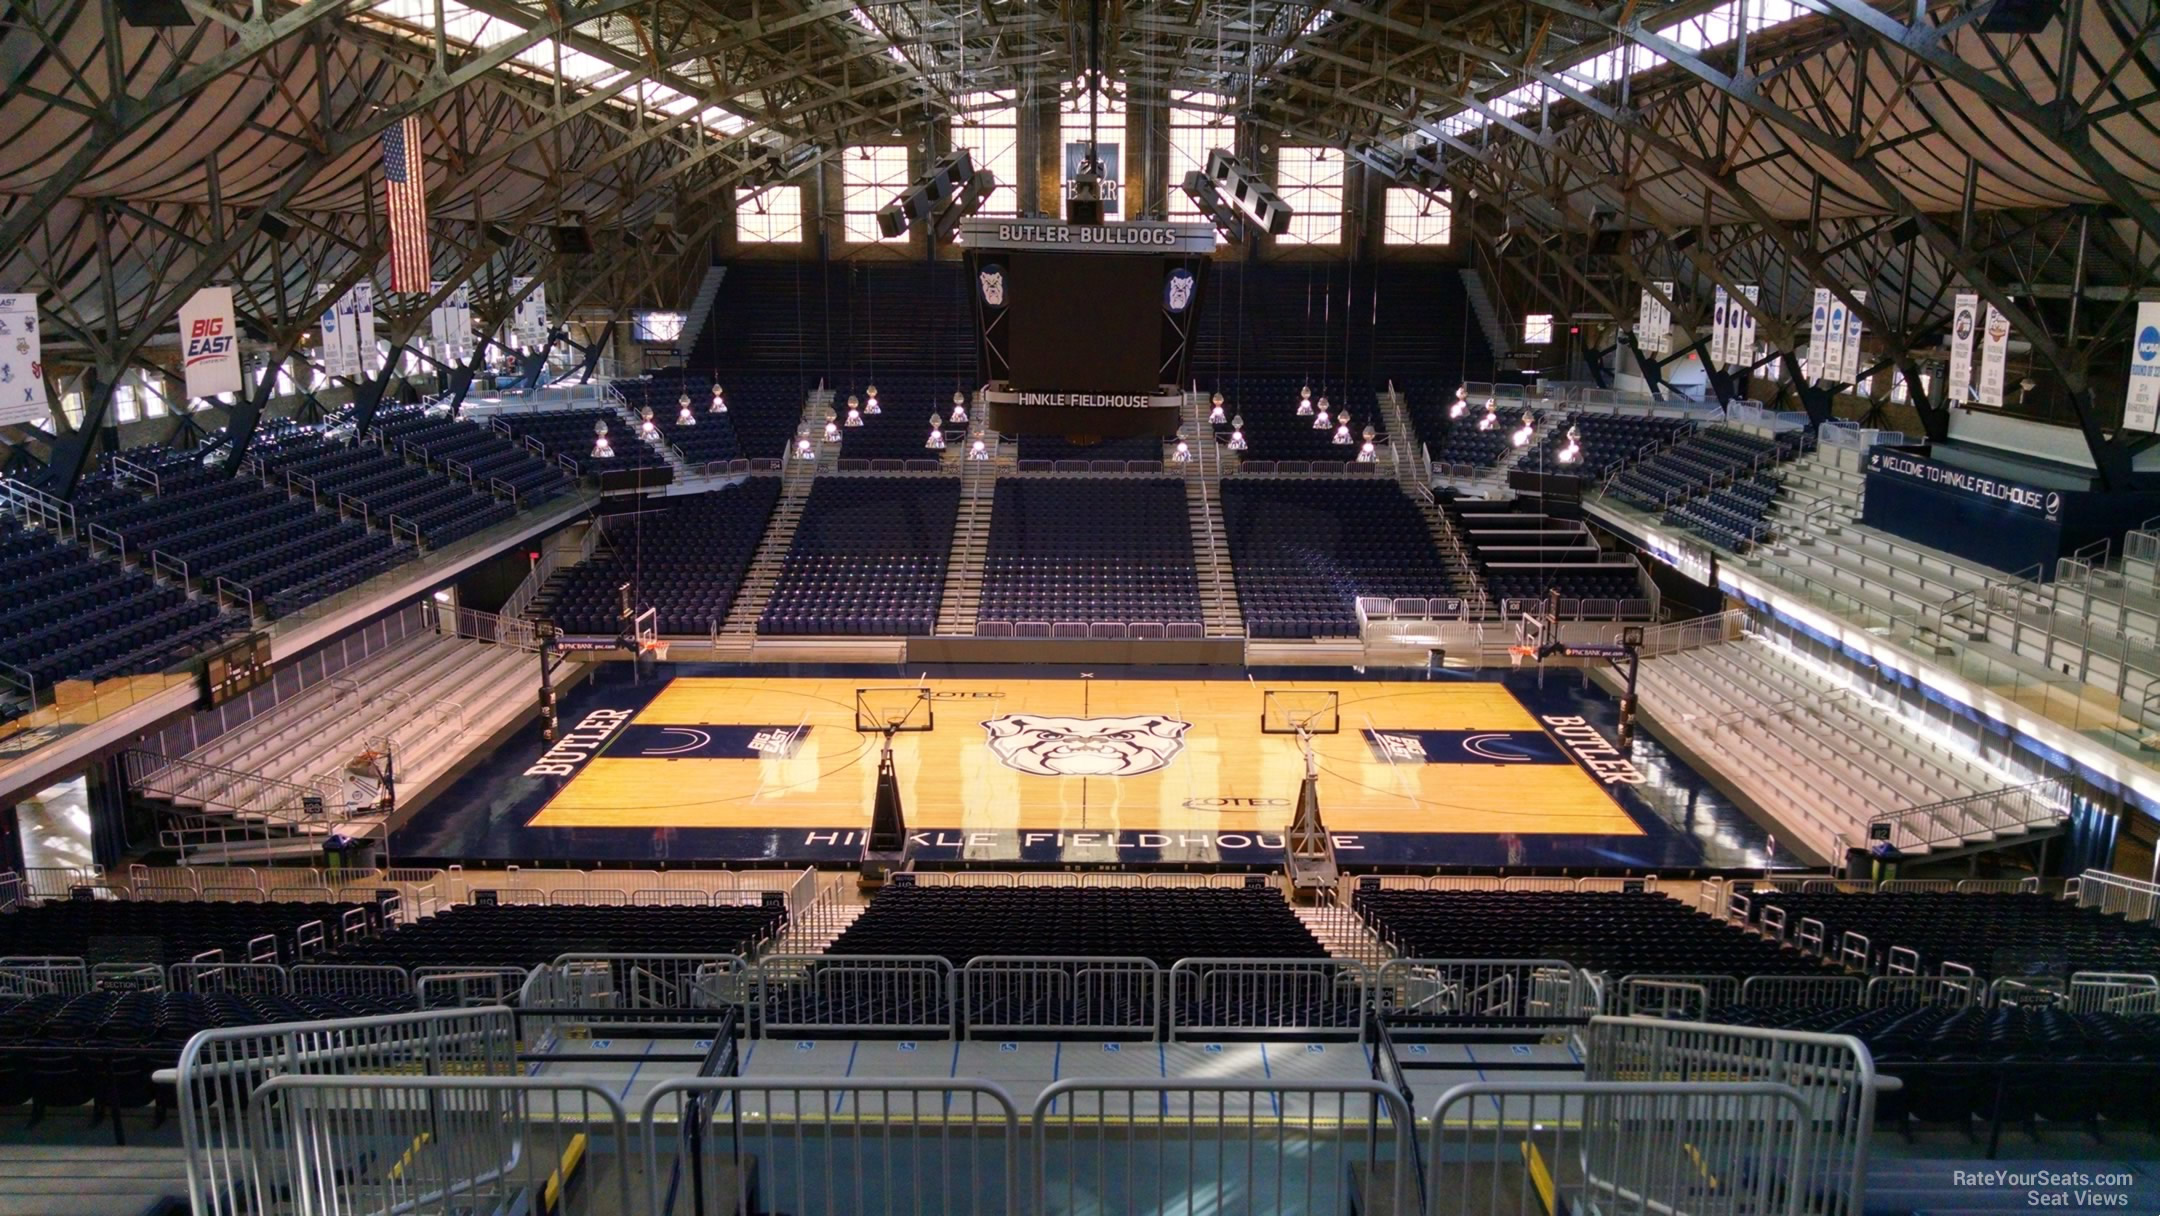 Hinkle Fieldhouse Section 318 - RateYourSeats.com